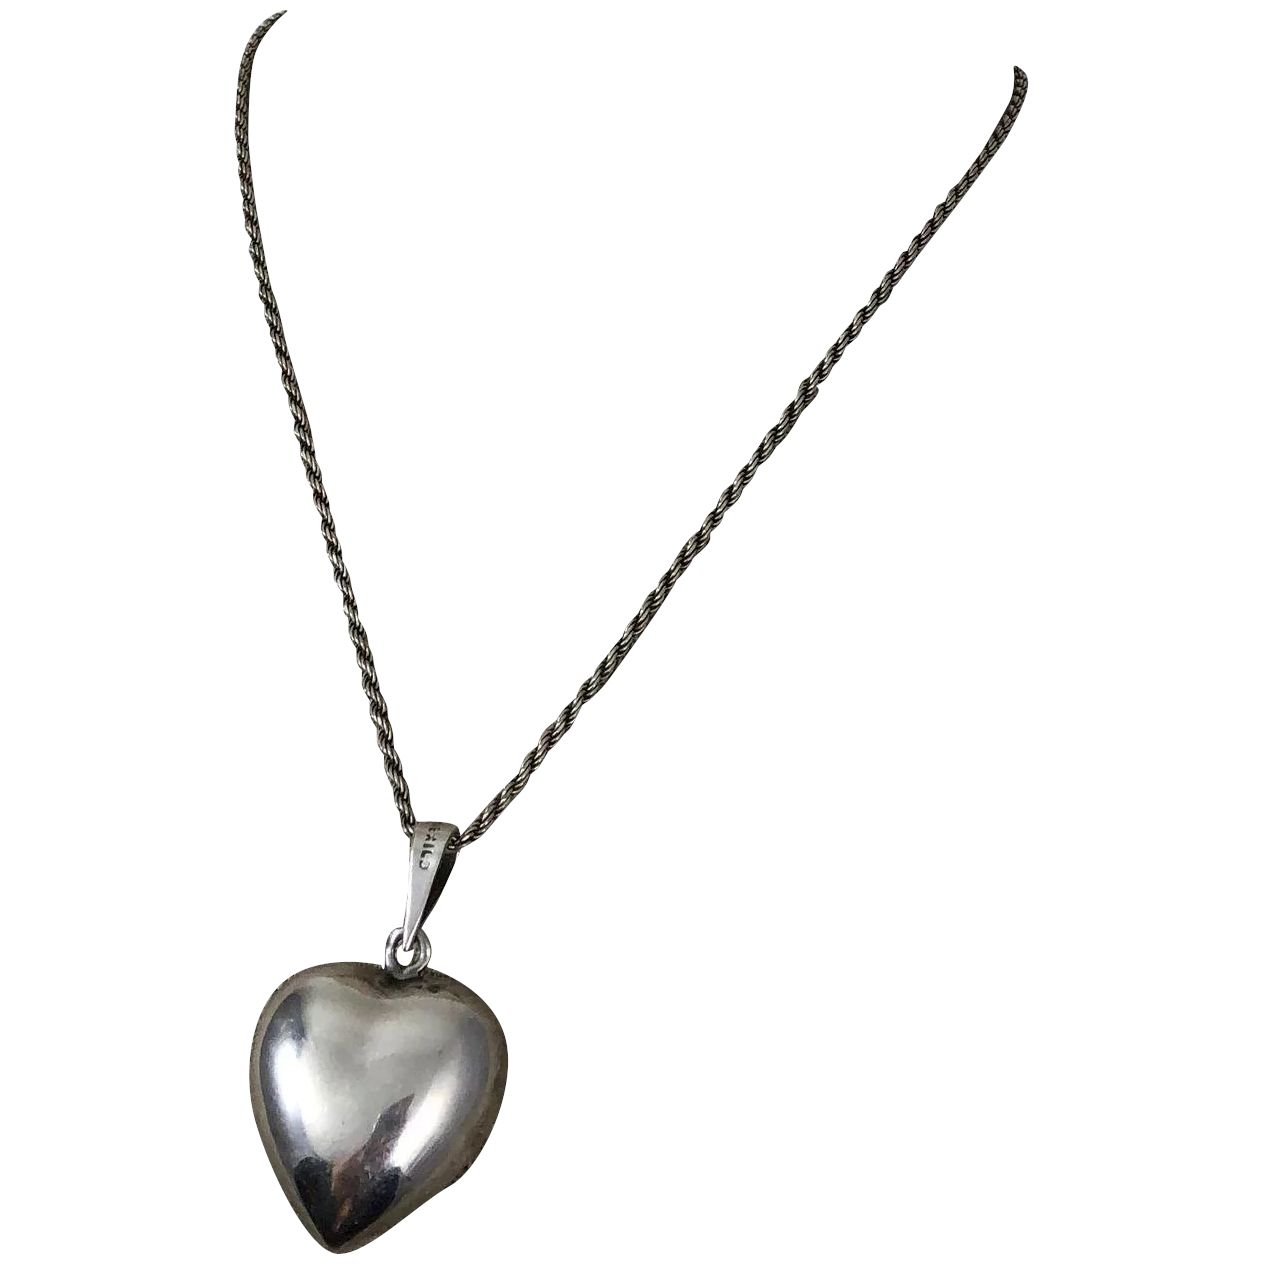 Vintage Mexican Sterling Silver Heart Shaped Bola Pregnancy Chime Pendant  Necklace For Most Recent Chiming Filigree Hearts Pendant Necklaces (View 8 of 25)